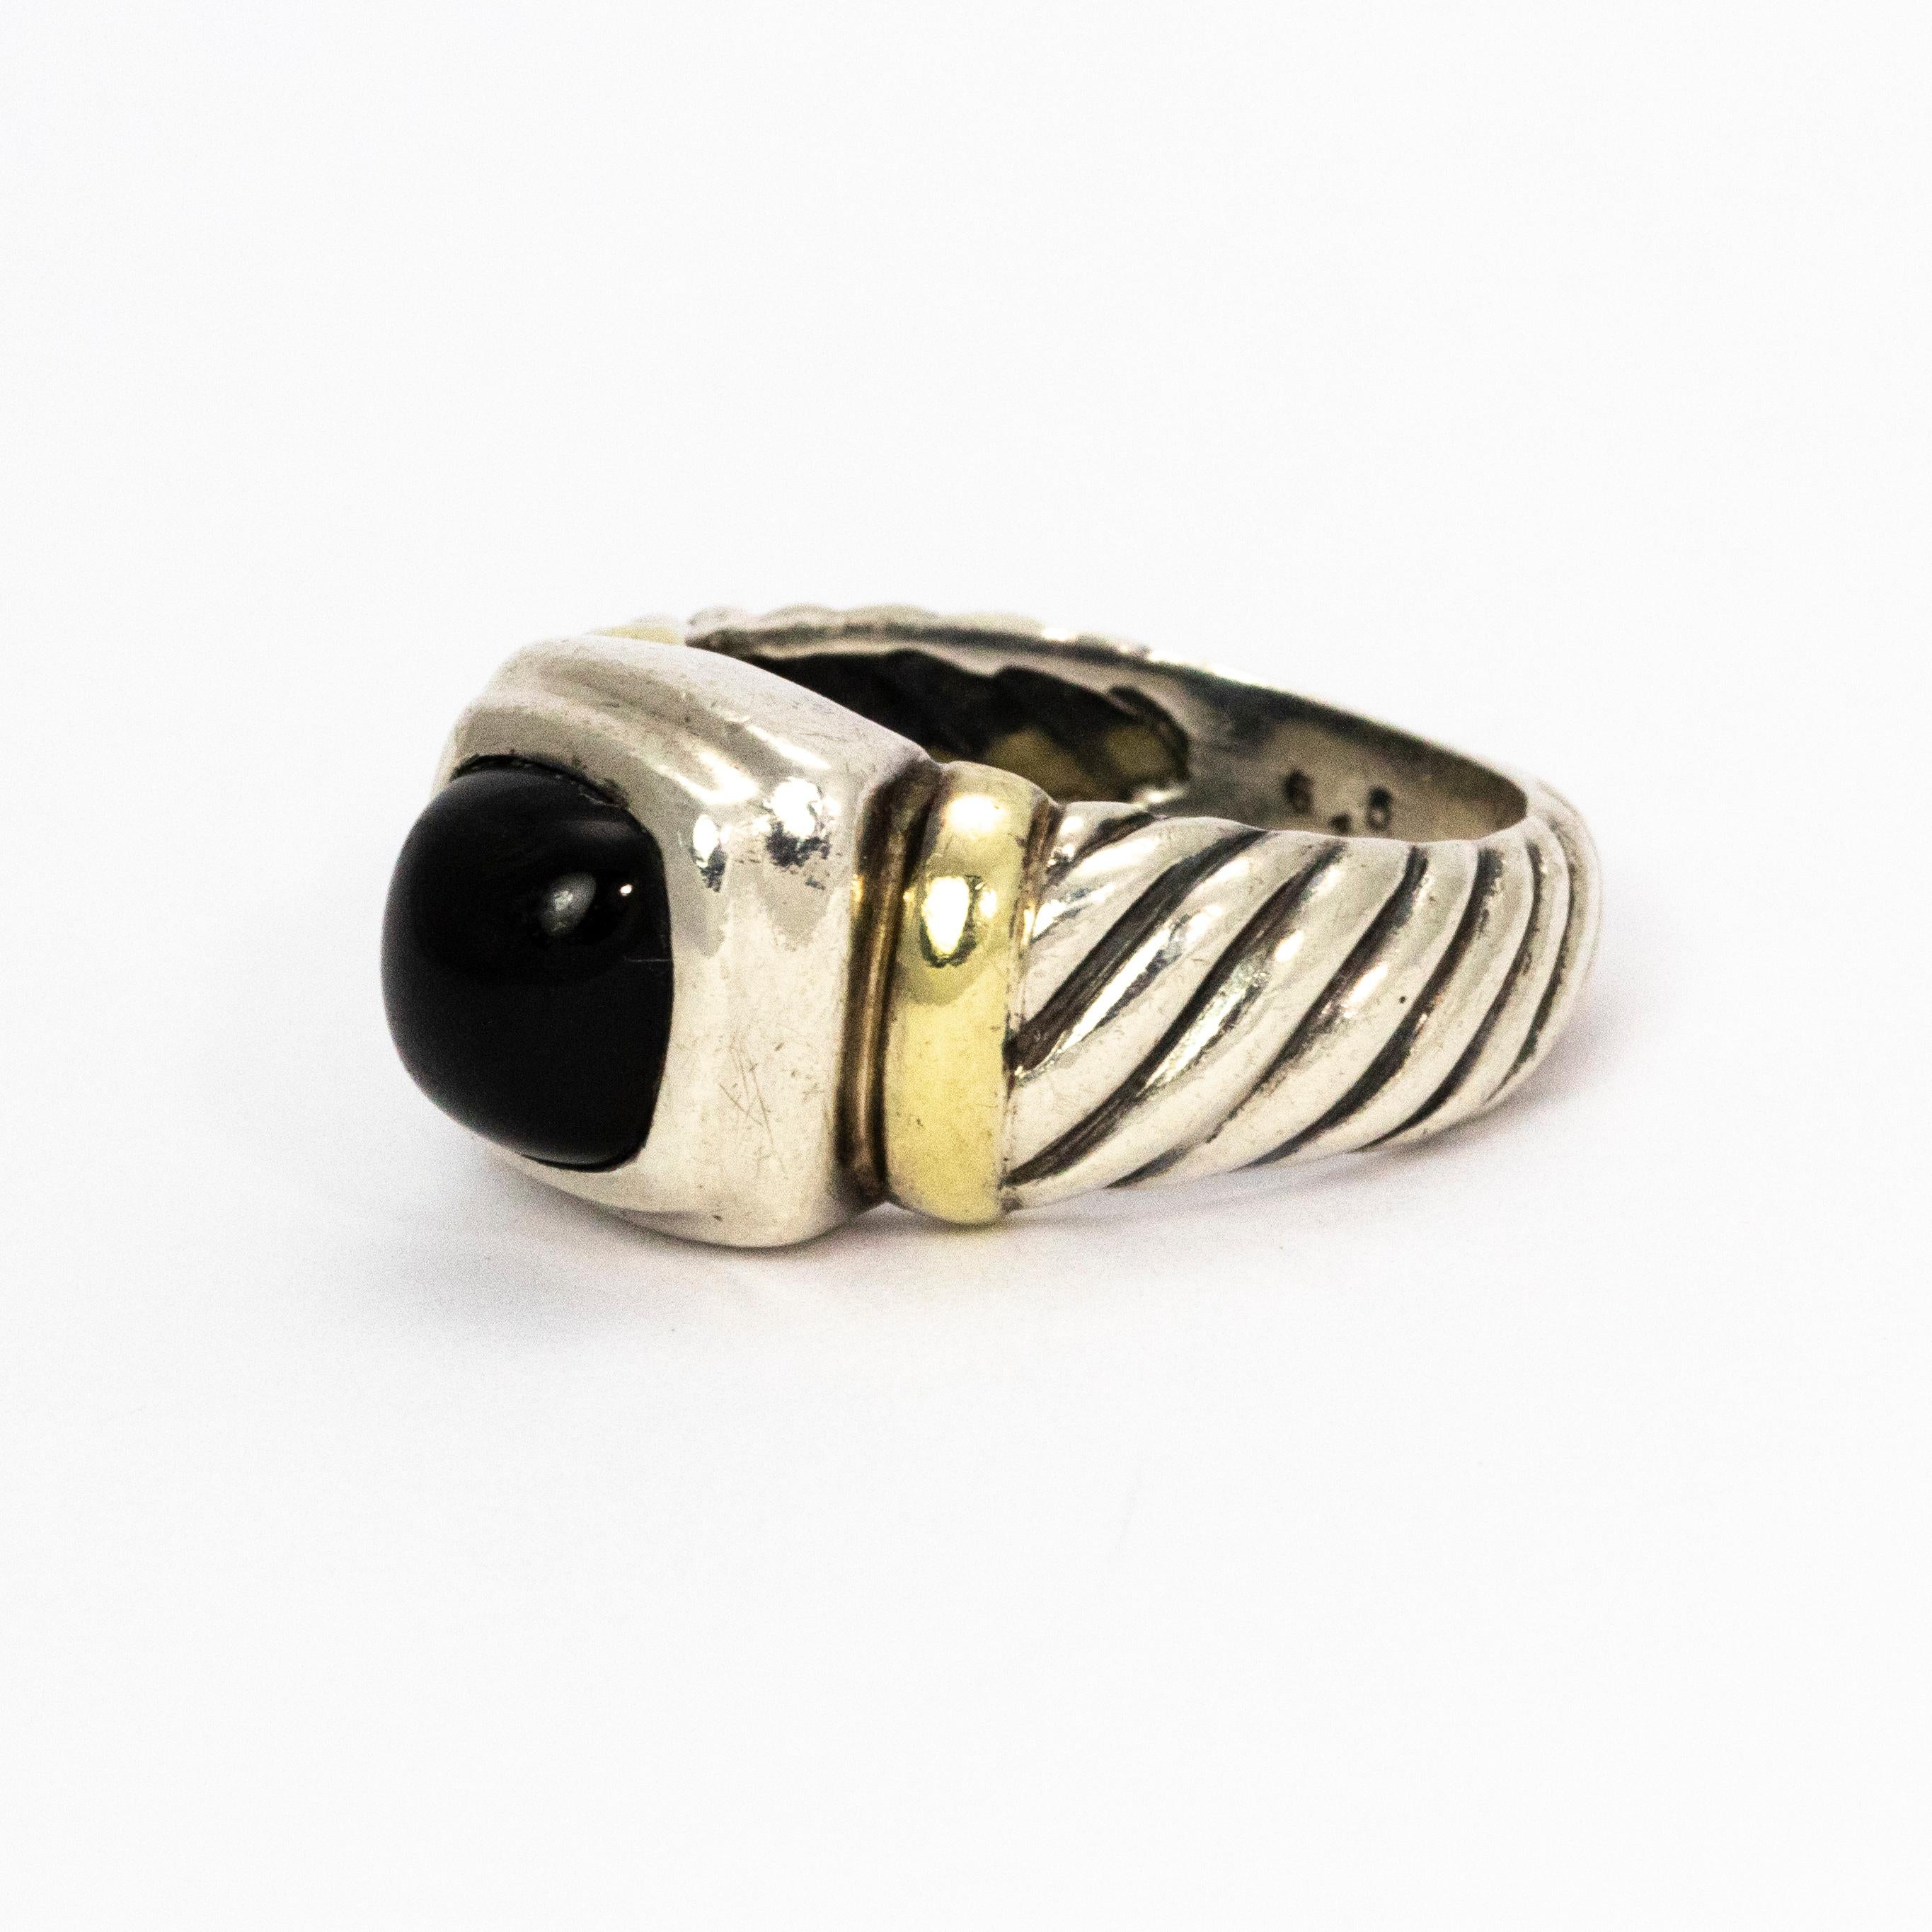 A beautifully detailed silver cable ring with 14k gold details finished with a perfectly glossy Onyx.

Ring Size: M 1/2 or 7